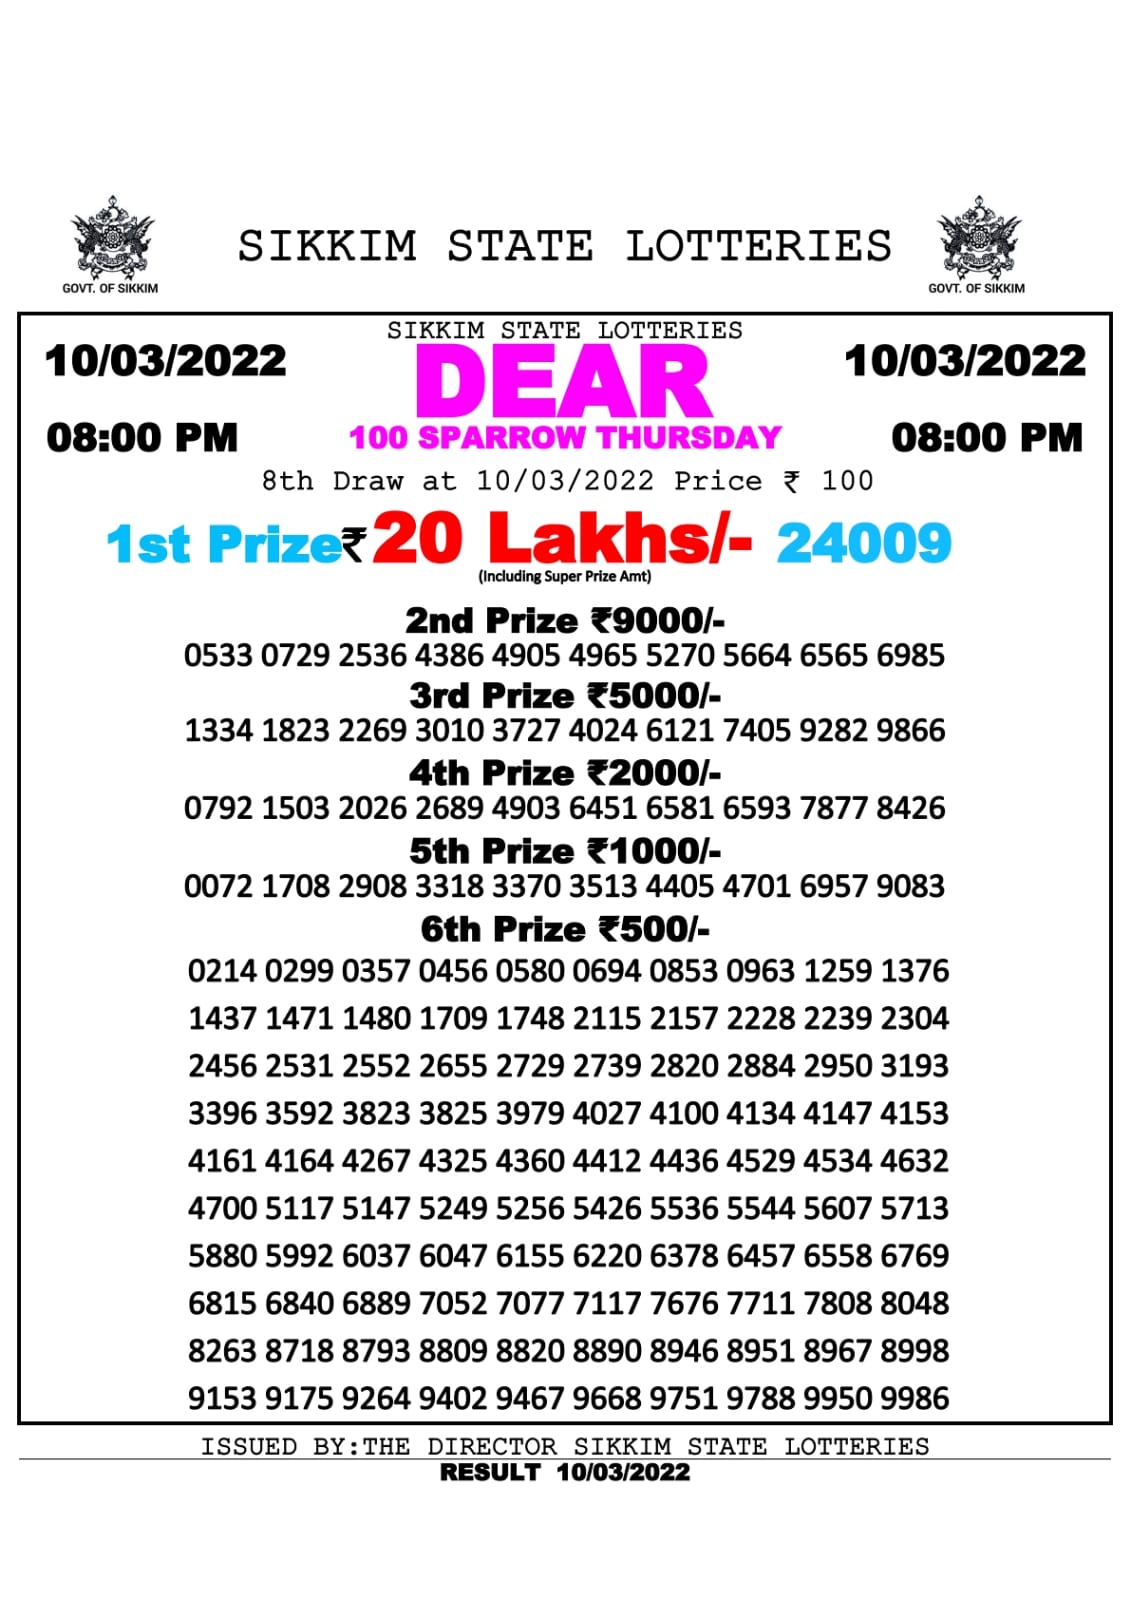 MARCH RESULT DEAR 100 WEEKLY RESULT 8.00PM 10.03.2022